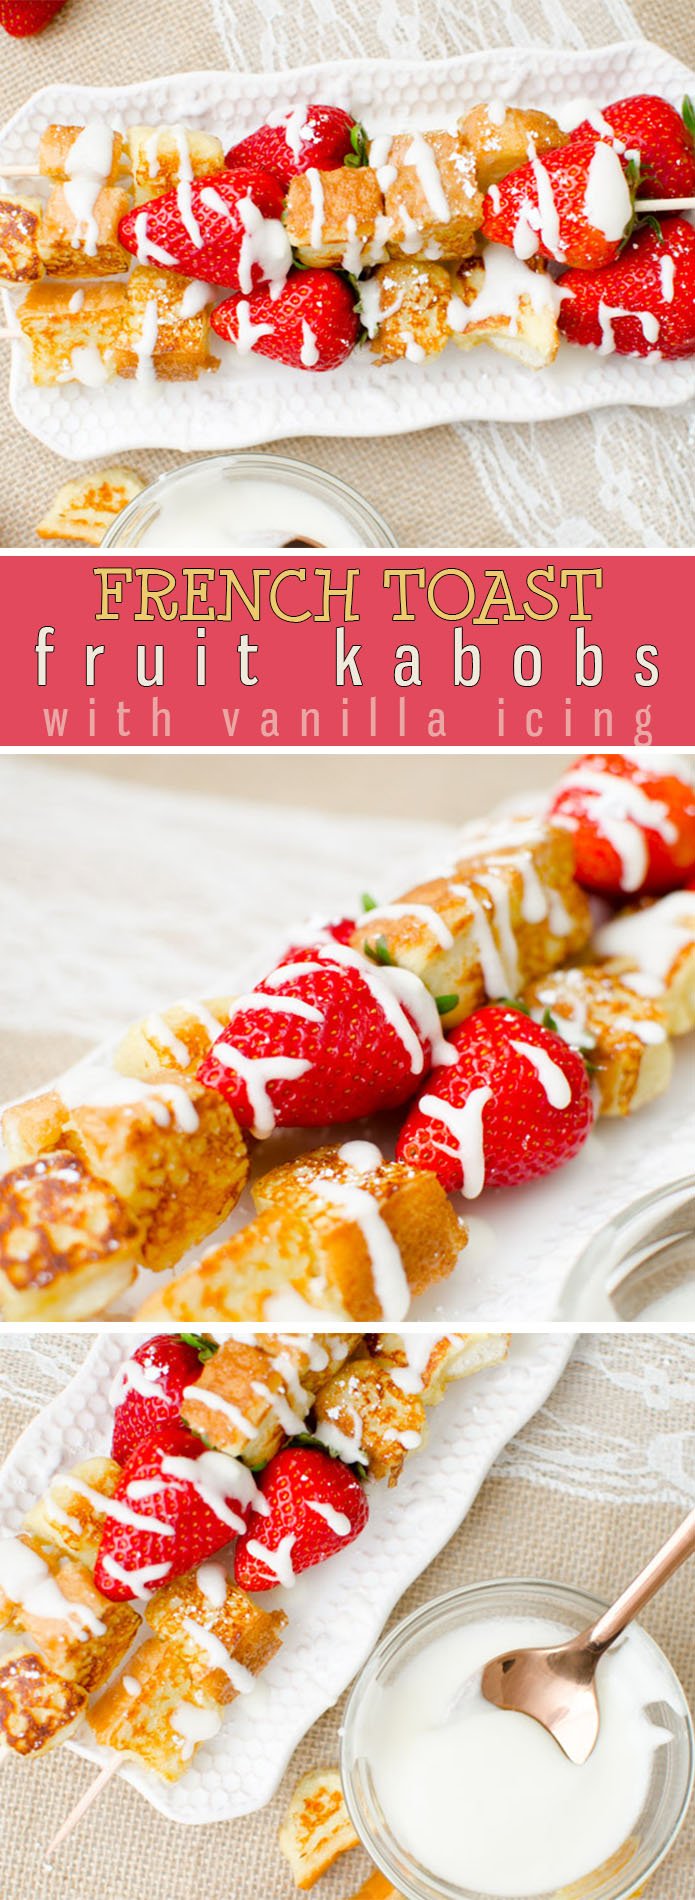 French Toast Fruit Kabobs are perfect, French Toast bites stacked onto a kabob with fresh strawberries in between. The French Toast Skewers are finished off with a drizzle of decedent homemade vanilla glaze. These Skewers are perfect for any brunch menu! |Butter with a Side of Bread| #breakfast #frenchtoast #fruitkabob #kabob #fingerfood #partyfood #recipe